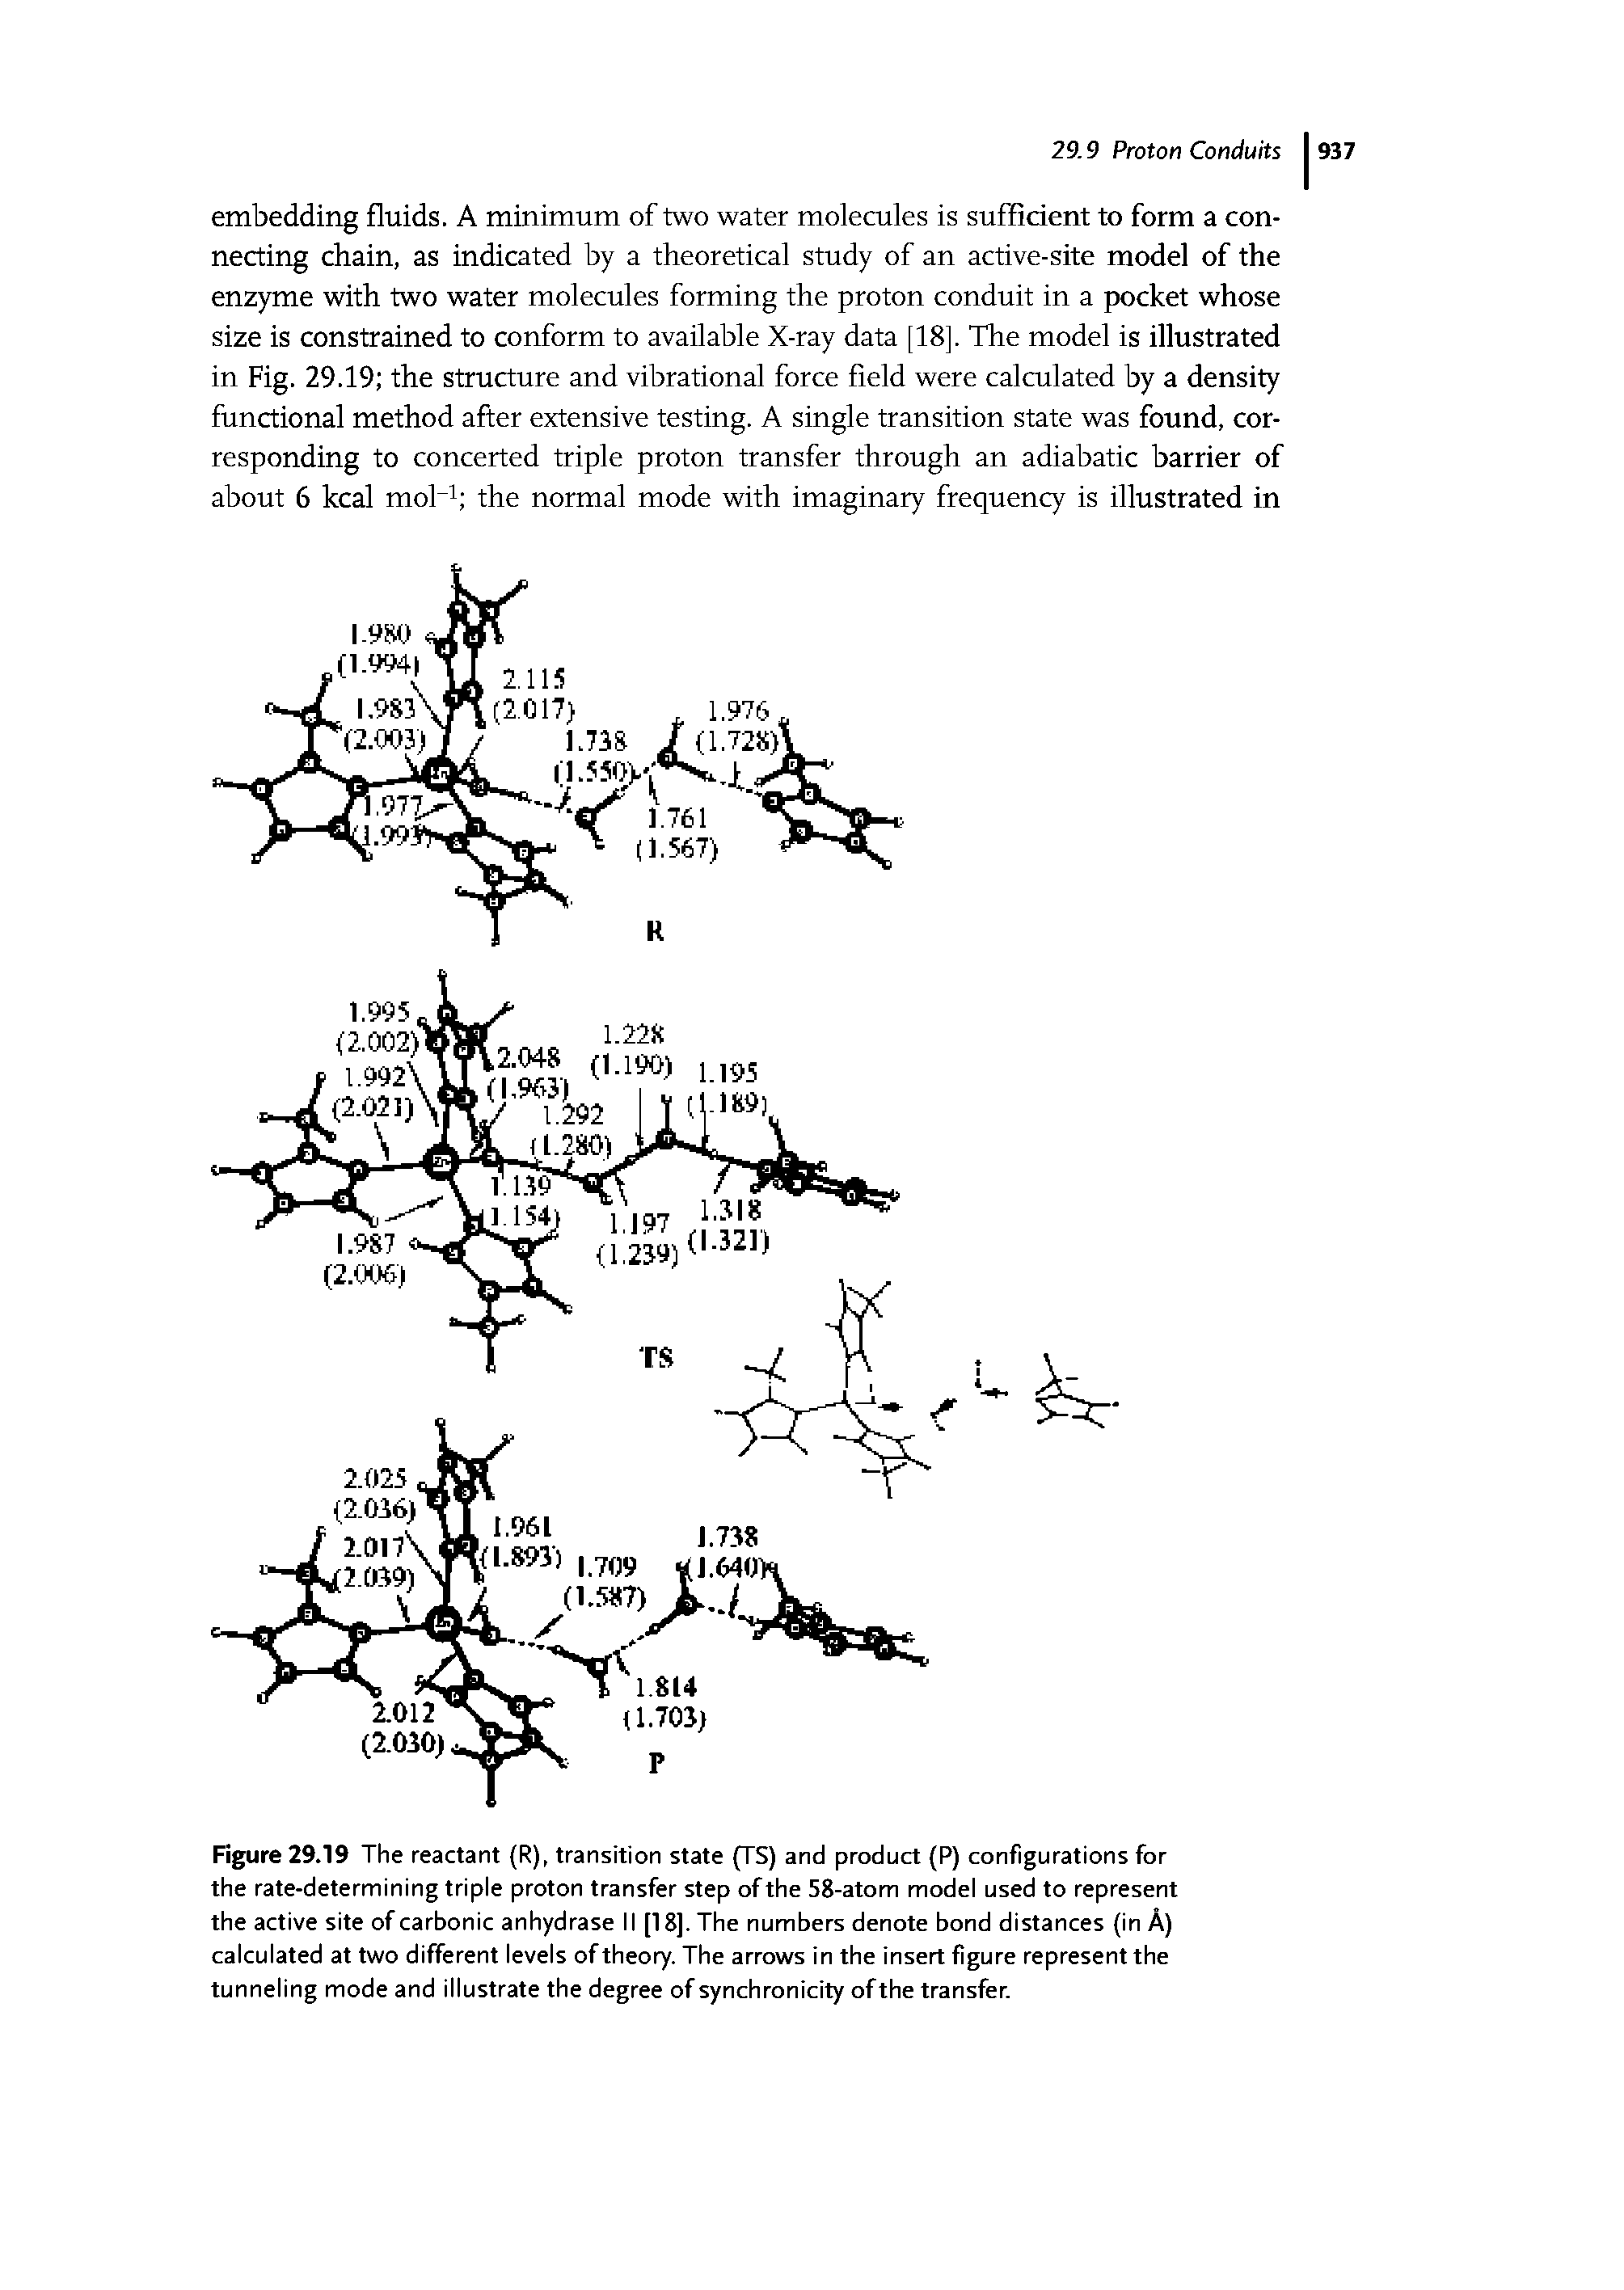 Figure 29.19 The reactant (R), transition state (TS) and product (P) configurations for the rate-determining triple proton transfer step of the 58-atom model used to represent the active site of carbonic anhydrase II [18]. The numbers denote bond distances (in A) calculated at two different levels of theory. The arrows in the insert figure represent the tunneling mode and illustrate the degree of synchronicity of the transfer.